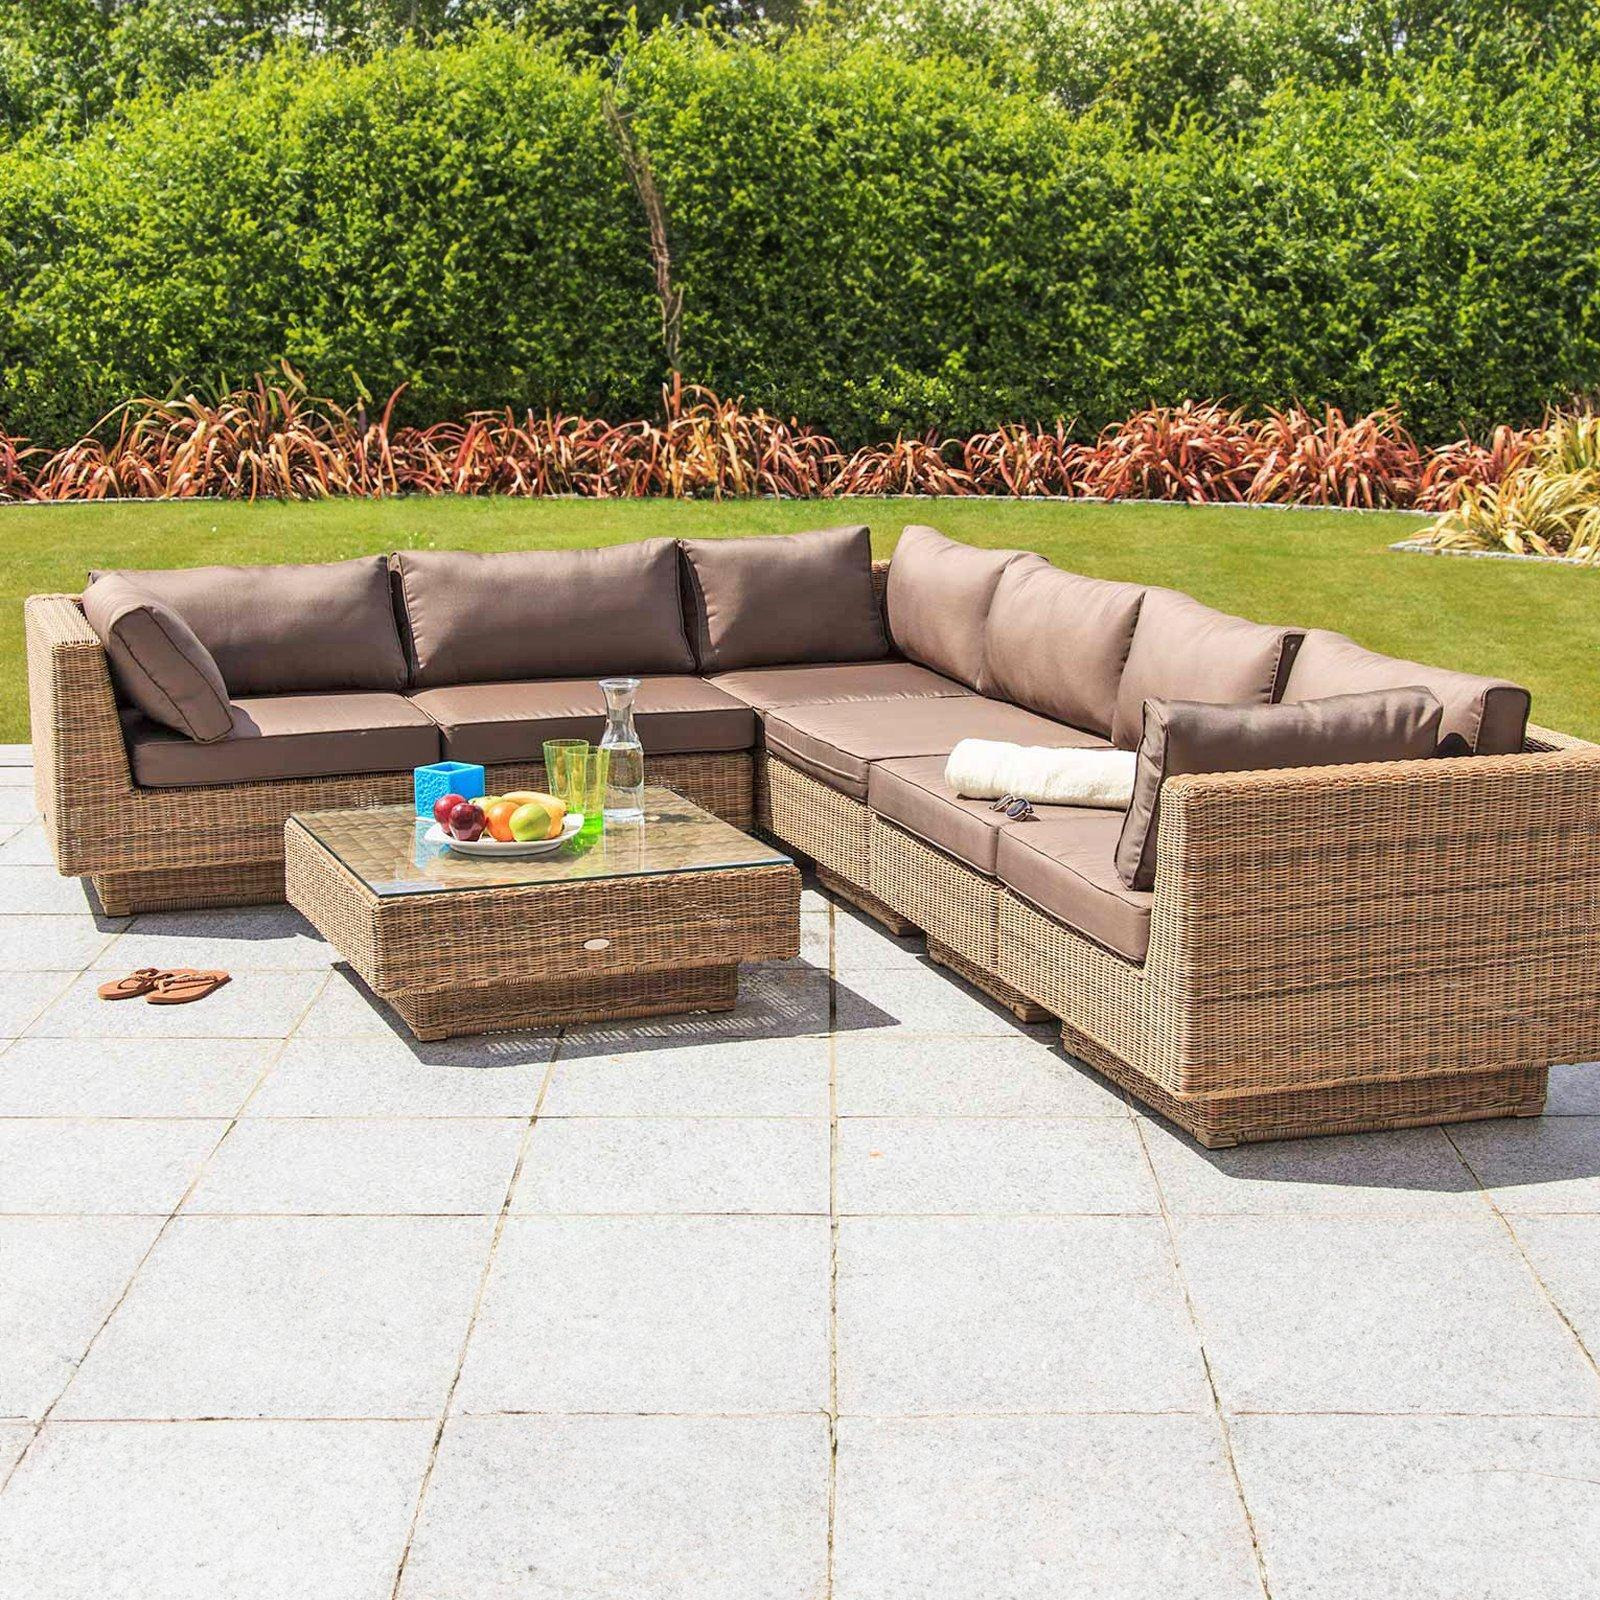 Chicago Rattan 6 Seater Deluxe Modular Lounge Set in 4 Seasons with Brown Cushions - image 1